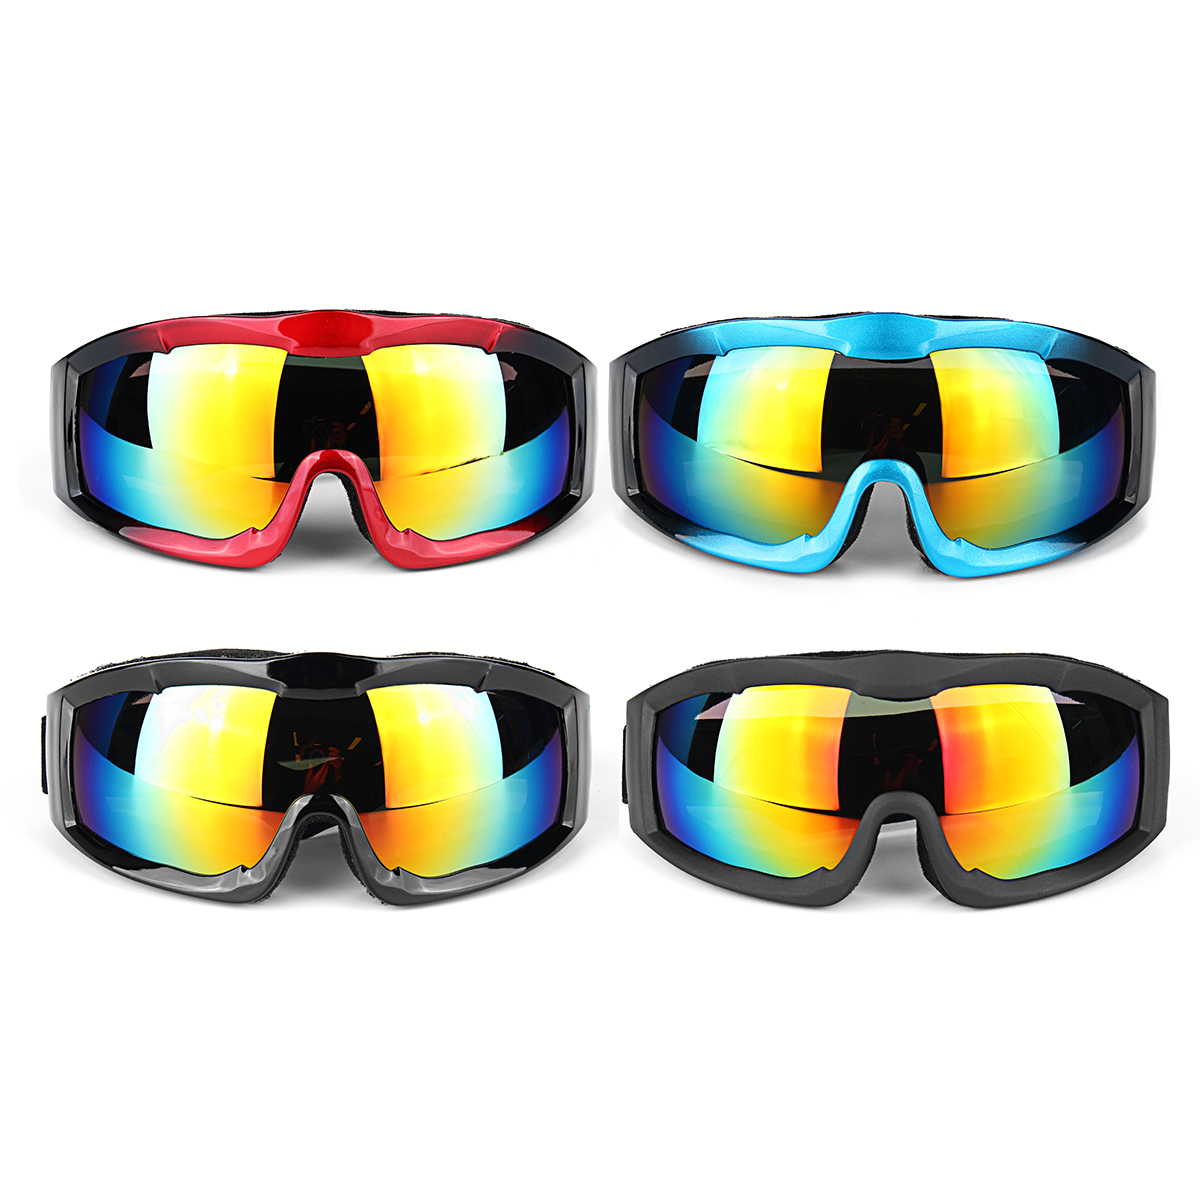 

OPOLLY 904 Motocycle Skiing Goggles Unisex Windproof Dustproof Glasses 4color